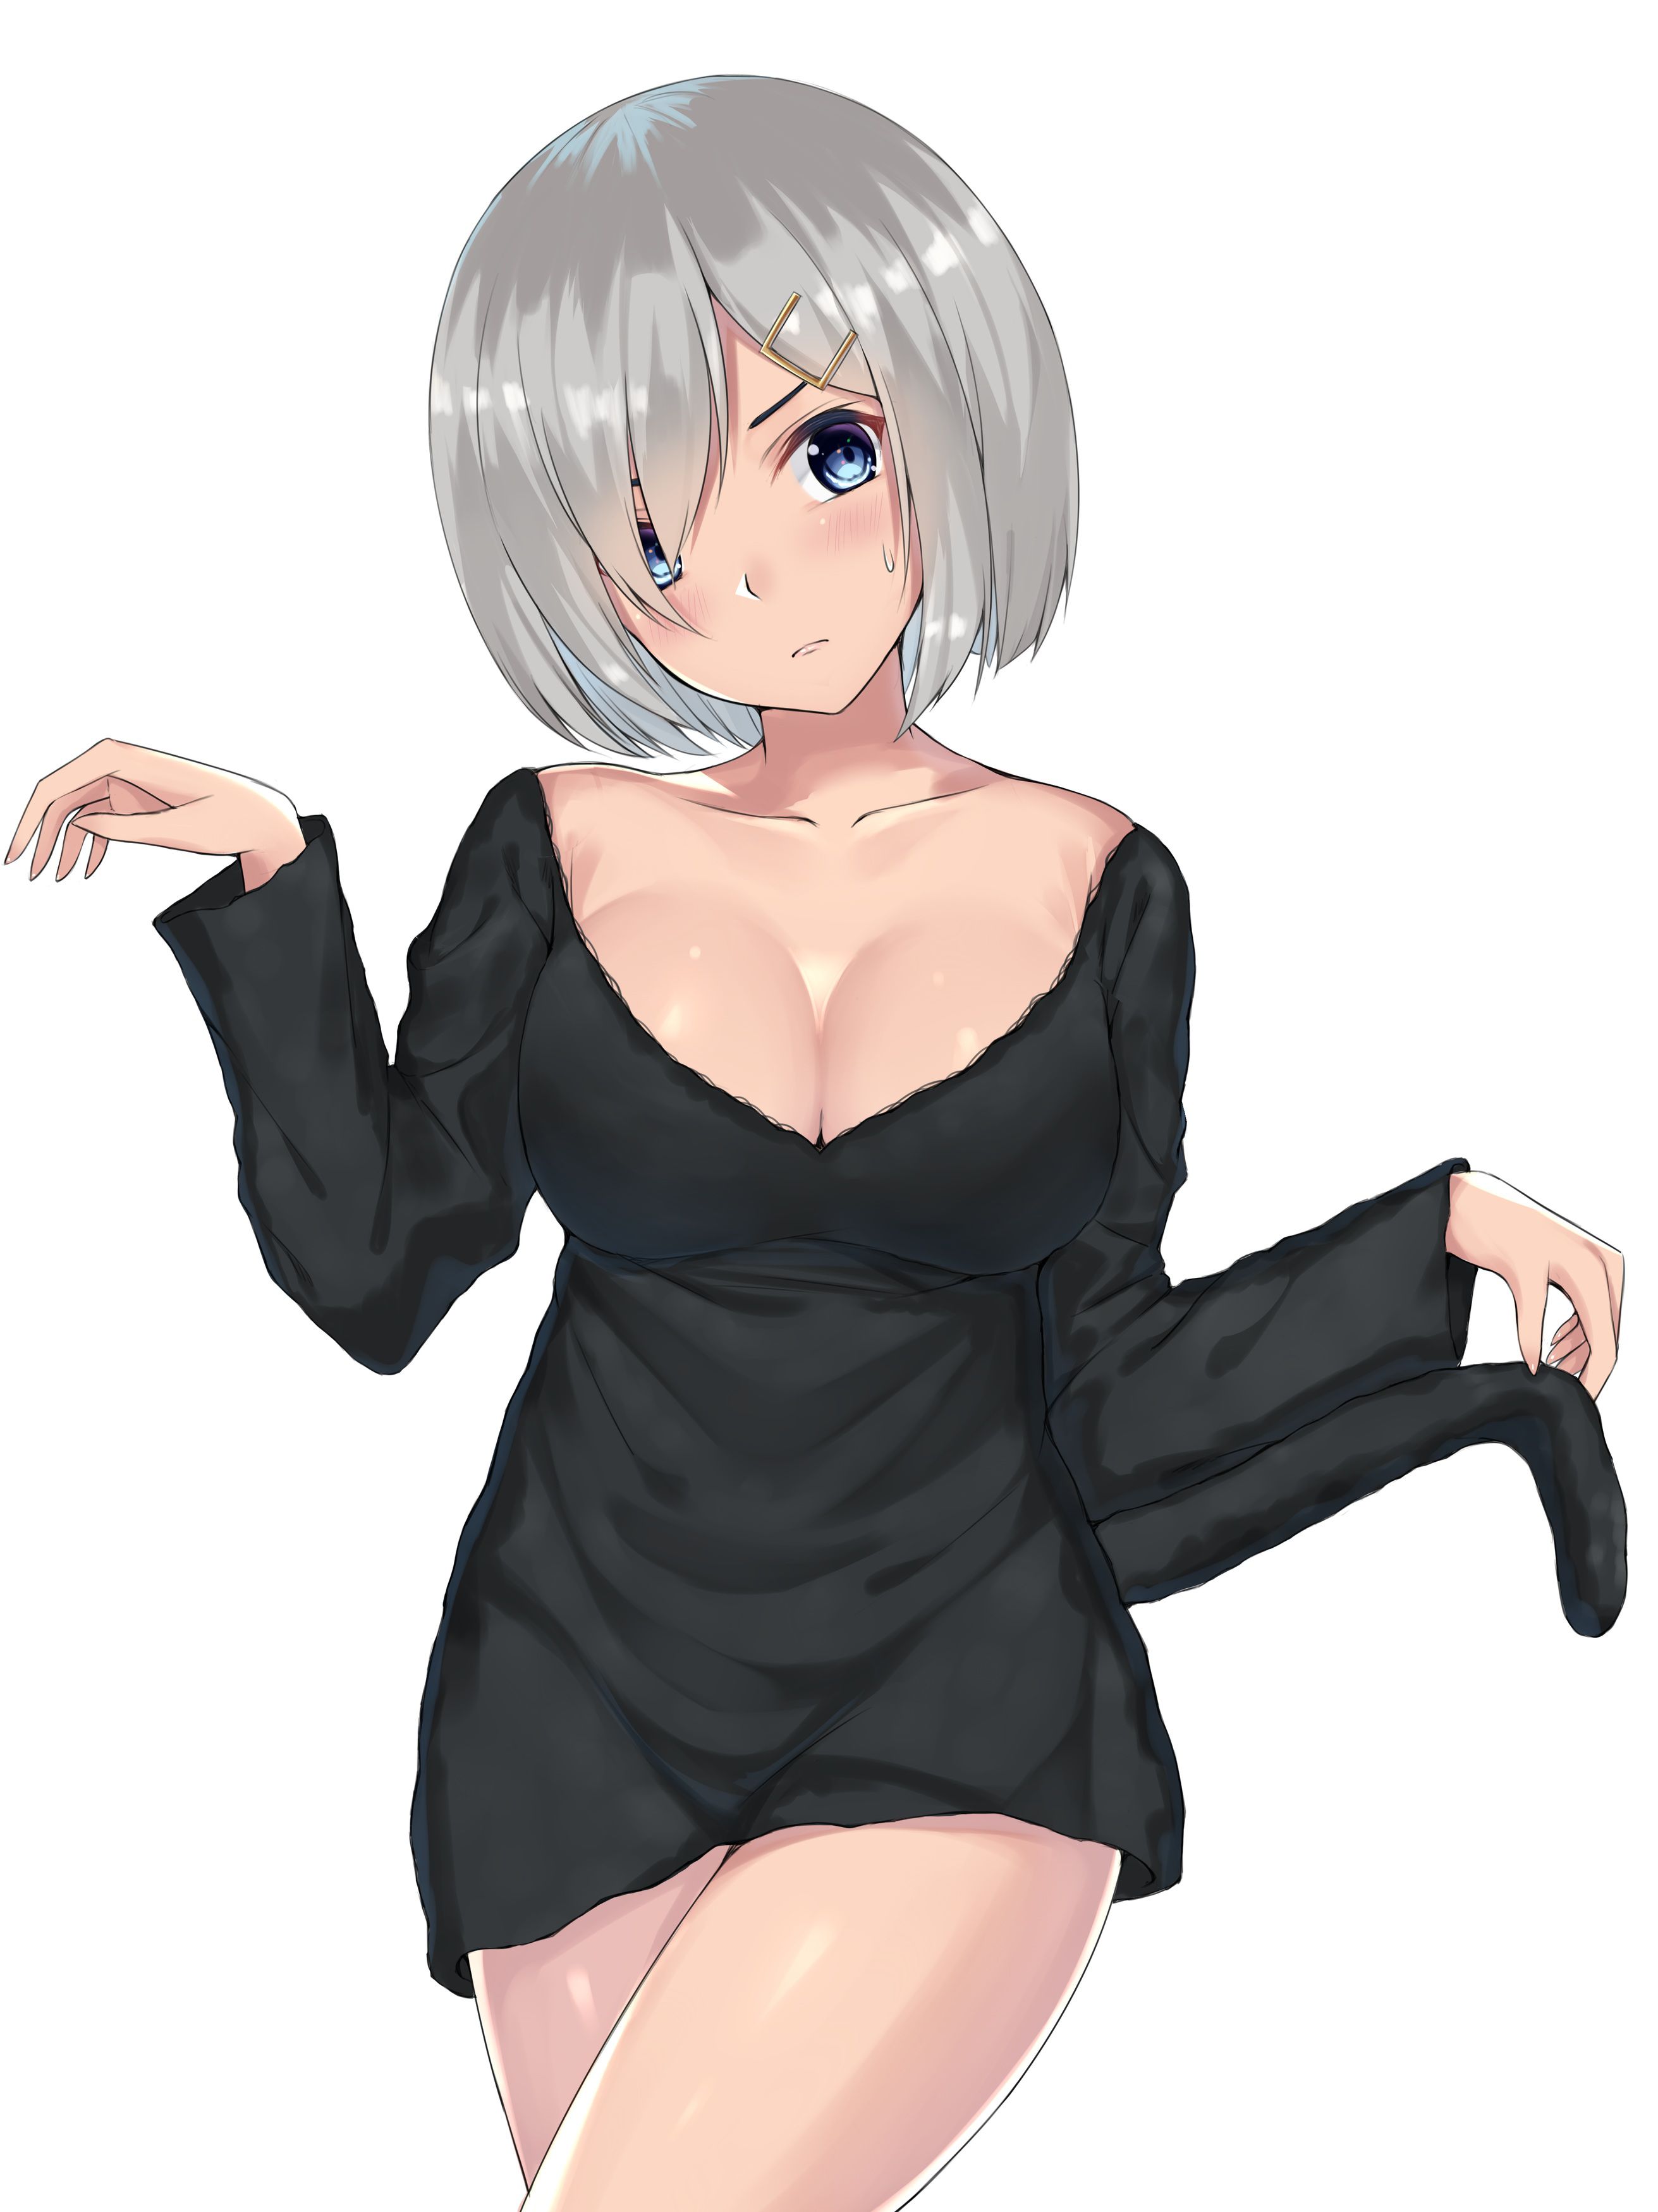 [Ship it] hamakaze erotic pictures so this overwhelming cuteness! 30